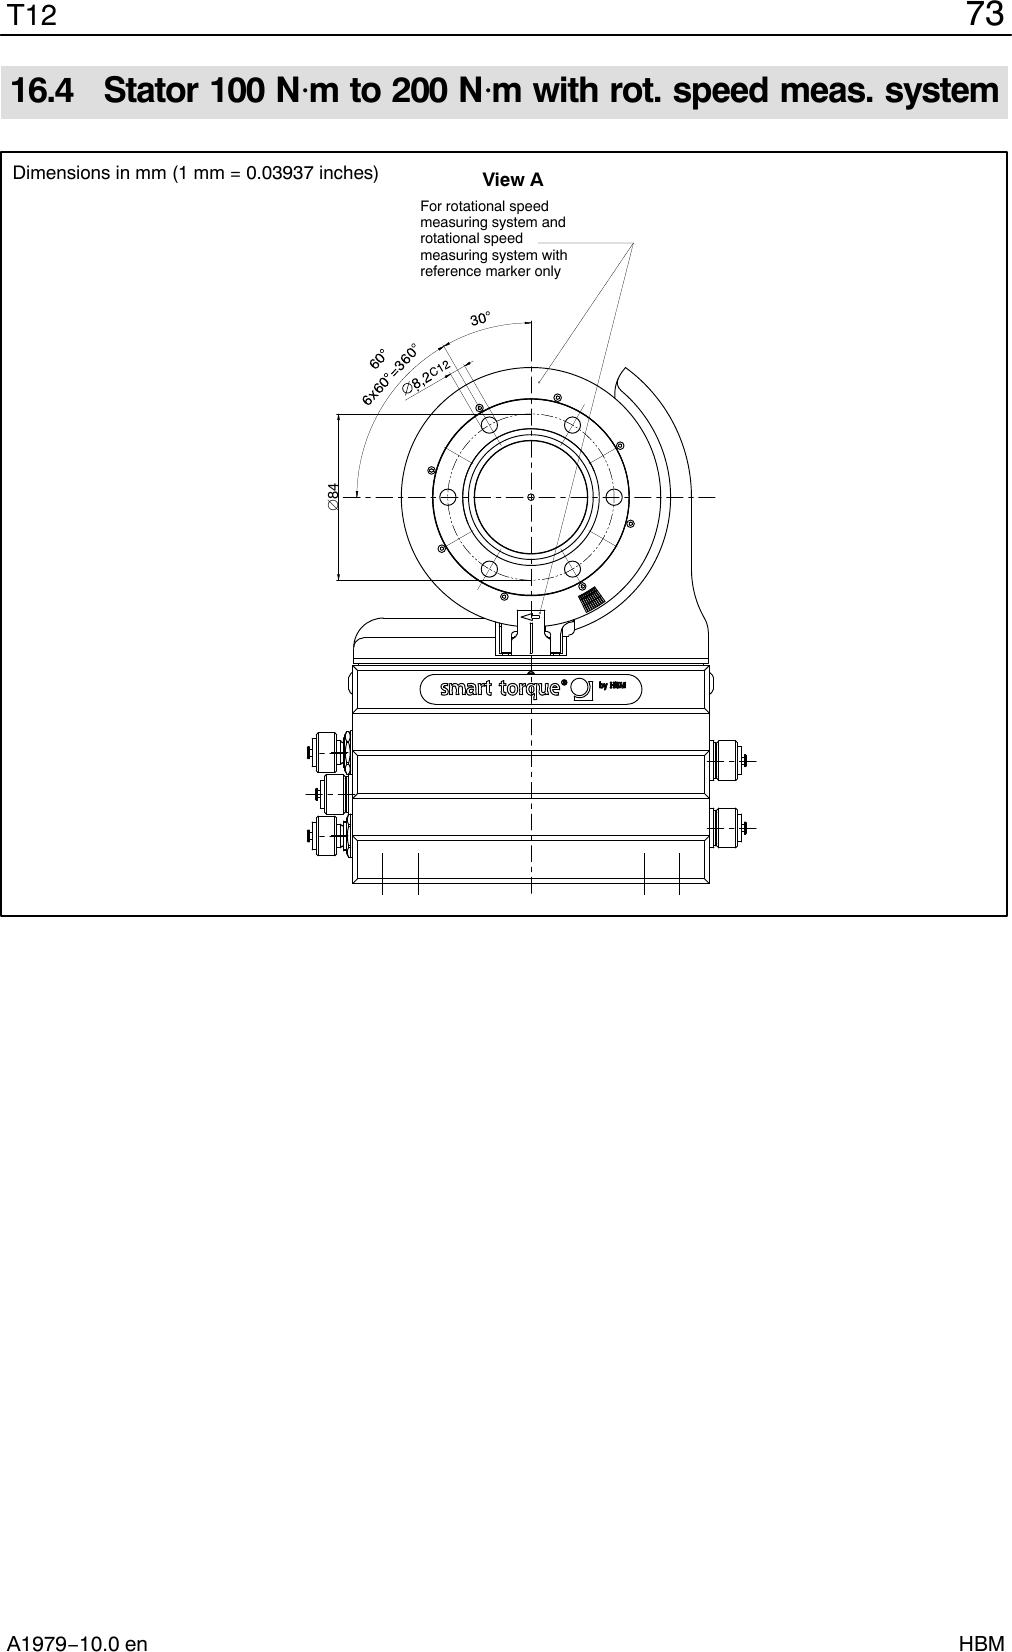 73T12A1979−10.0 en HBM16.4  Stator 100 Nm to 200 Nm with rot. speed meas. systemFor rotational speedmeasuring system androtational speedmeasuring system withreference marker only84View ADimensions in mm (1 mm = 0.03937 inches)